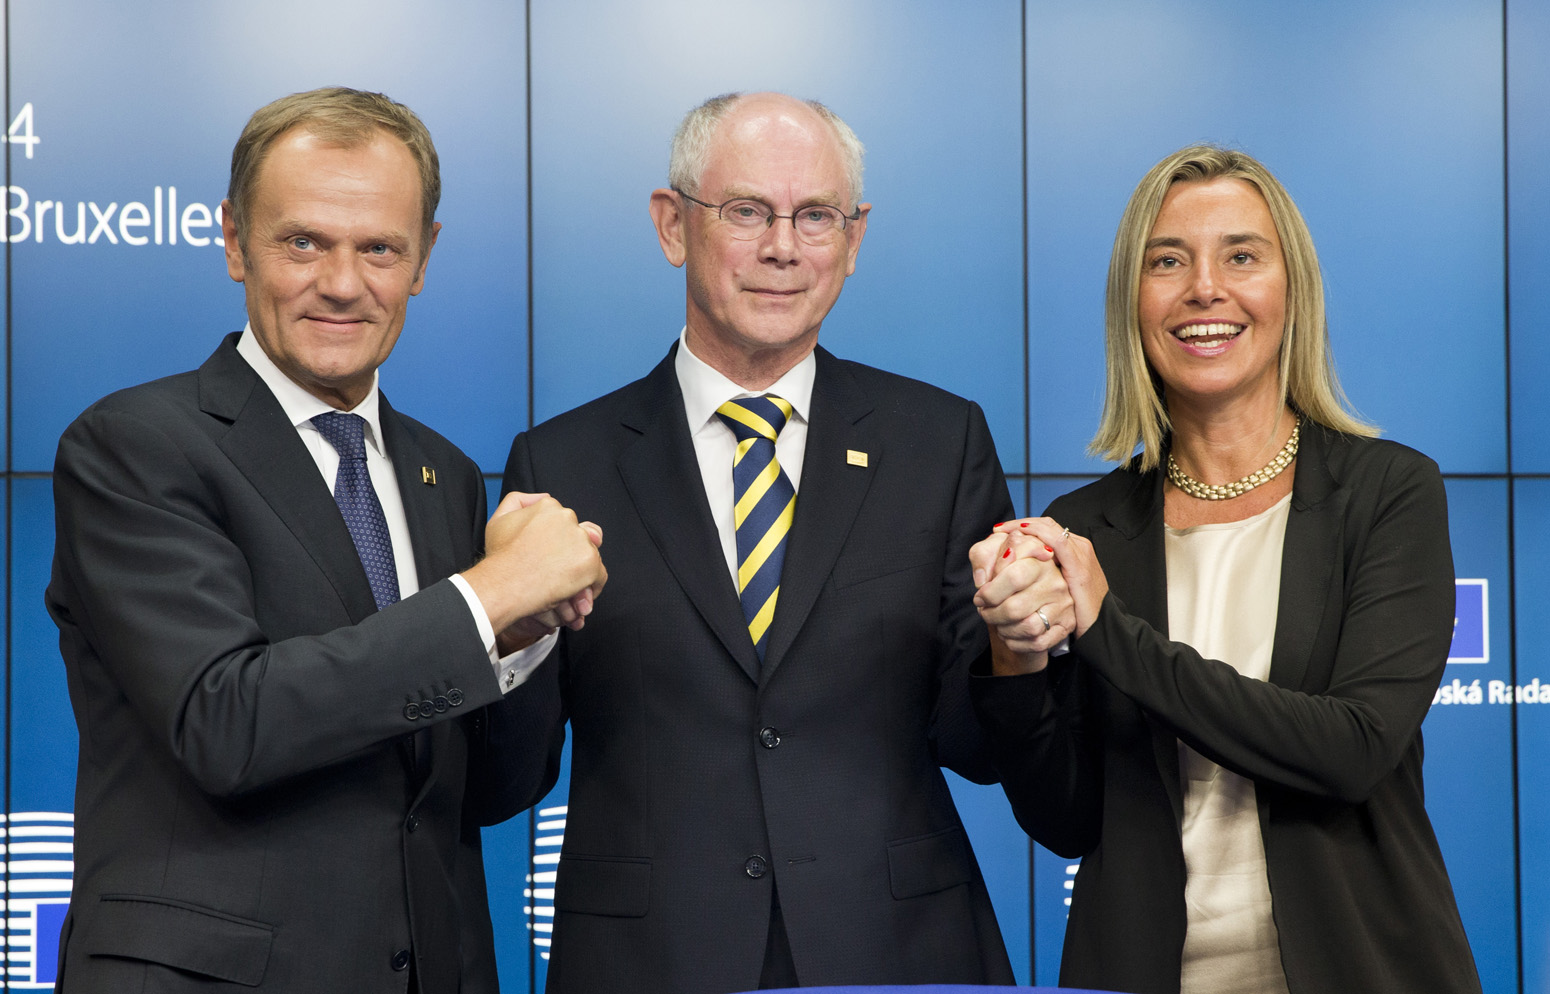 Polish Prime Minister Donald TUSK with President of the European Council  Herman VAN ROMPUY, and Italian Foreign Minister Federica MOGHERINI